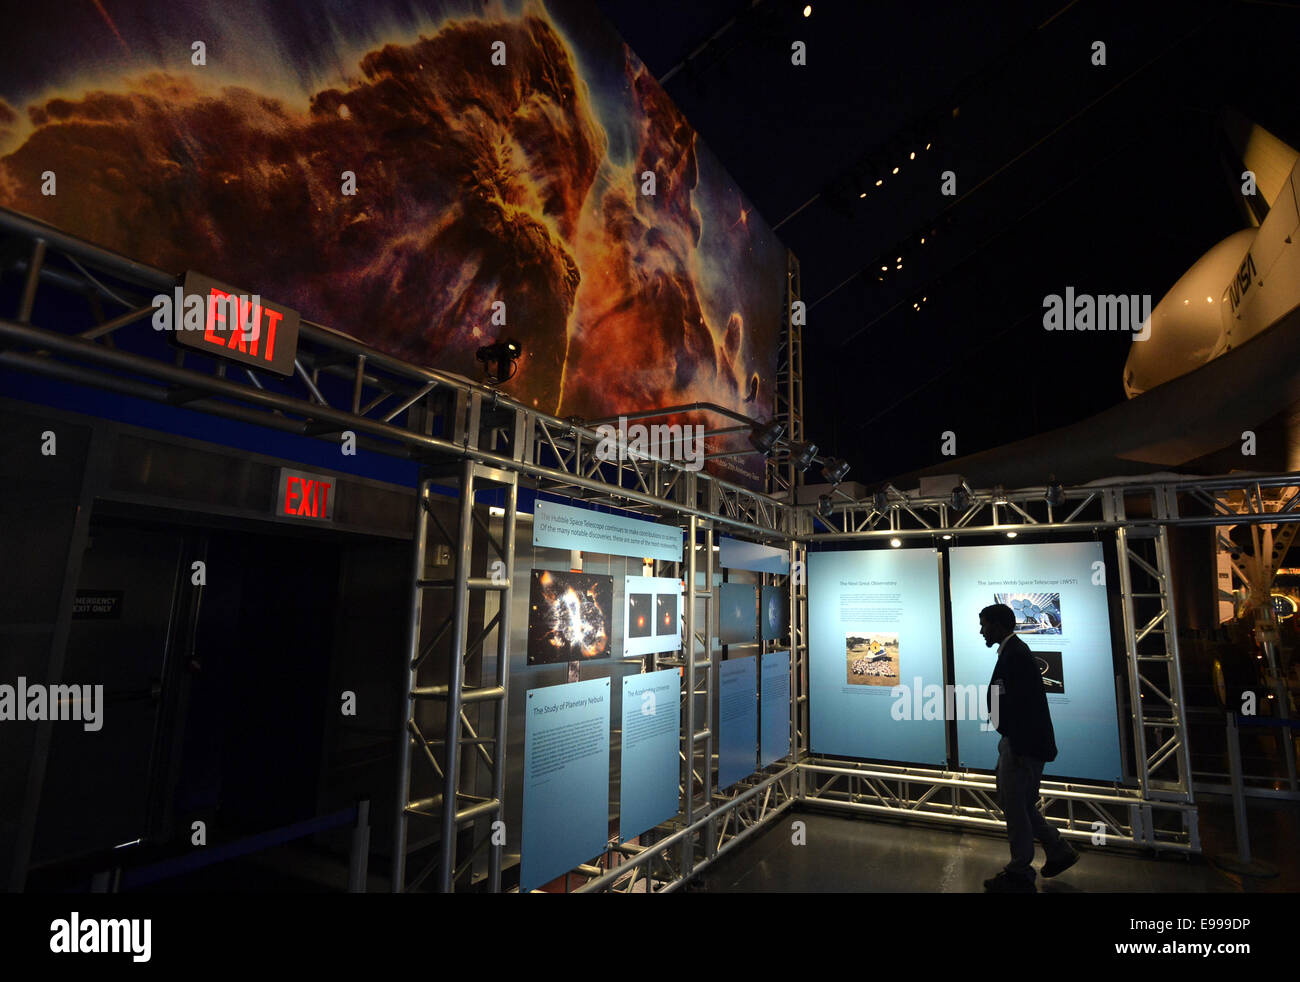 New York, USA. 22nd Oct, 2014. A reporter attends the press preview of a new exhibit named 'HUBBLE@25', which is to celebrate the 25th anniversary of NASA's launch of the Hubble Space Telescope, at the Intrepid Sea, Air & Space Museum in New York City, the United States, Oct. 22, 2014. Through the images produced by Hubble, tools used in space to repair the telescope, and interactive guests' experiences, the exhibit will open to the public on Thursday and tell the story of Hubble's 25-year history. Credit:  Wang Lei/Xinhua/Alamy Live News Stock Photo